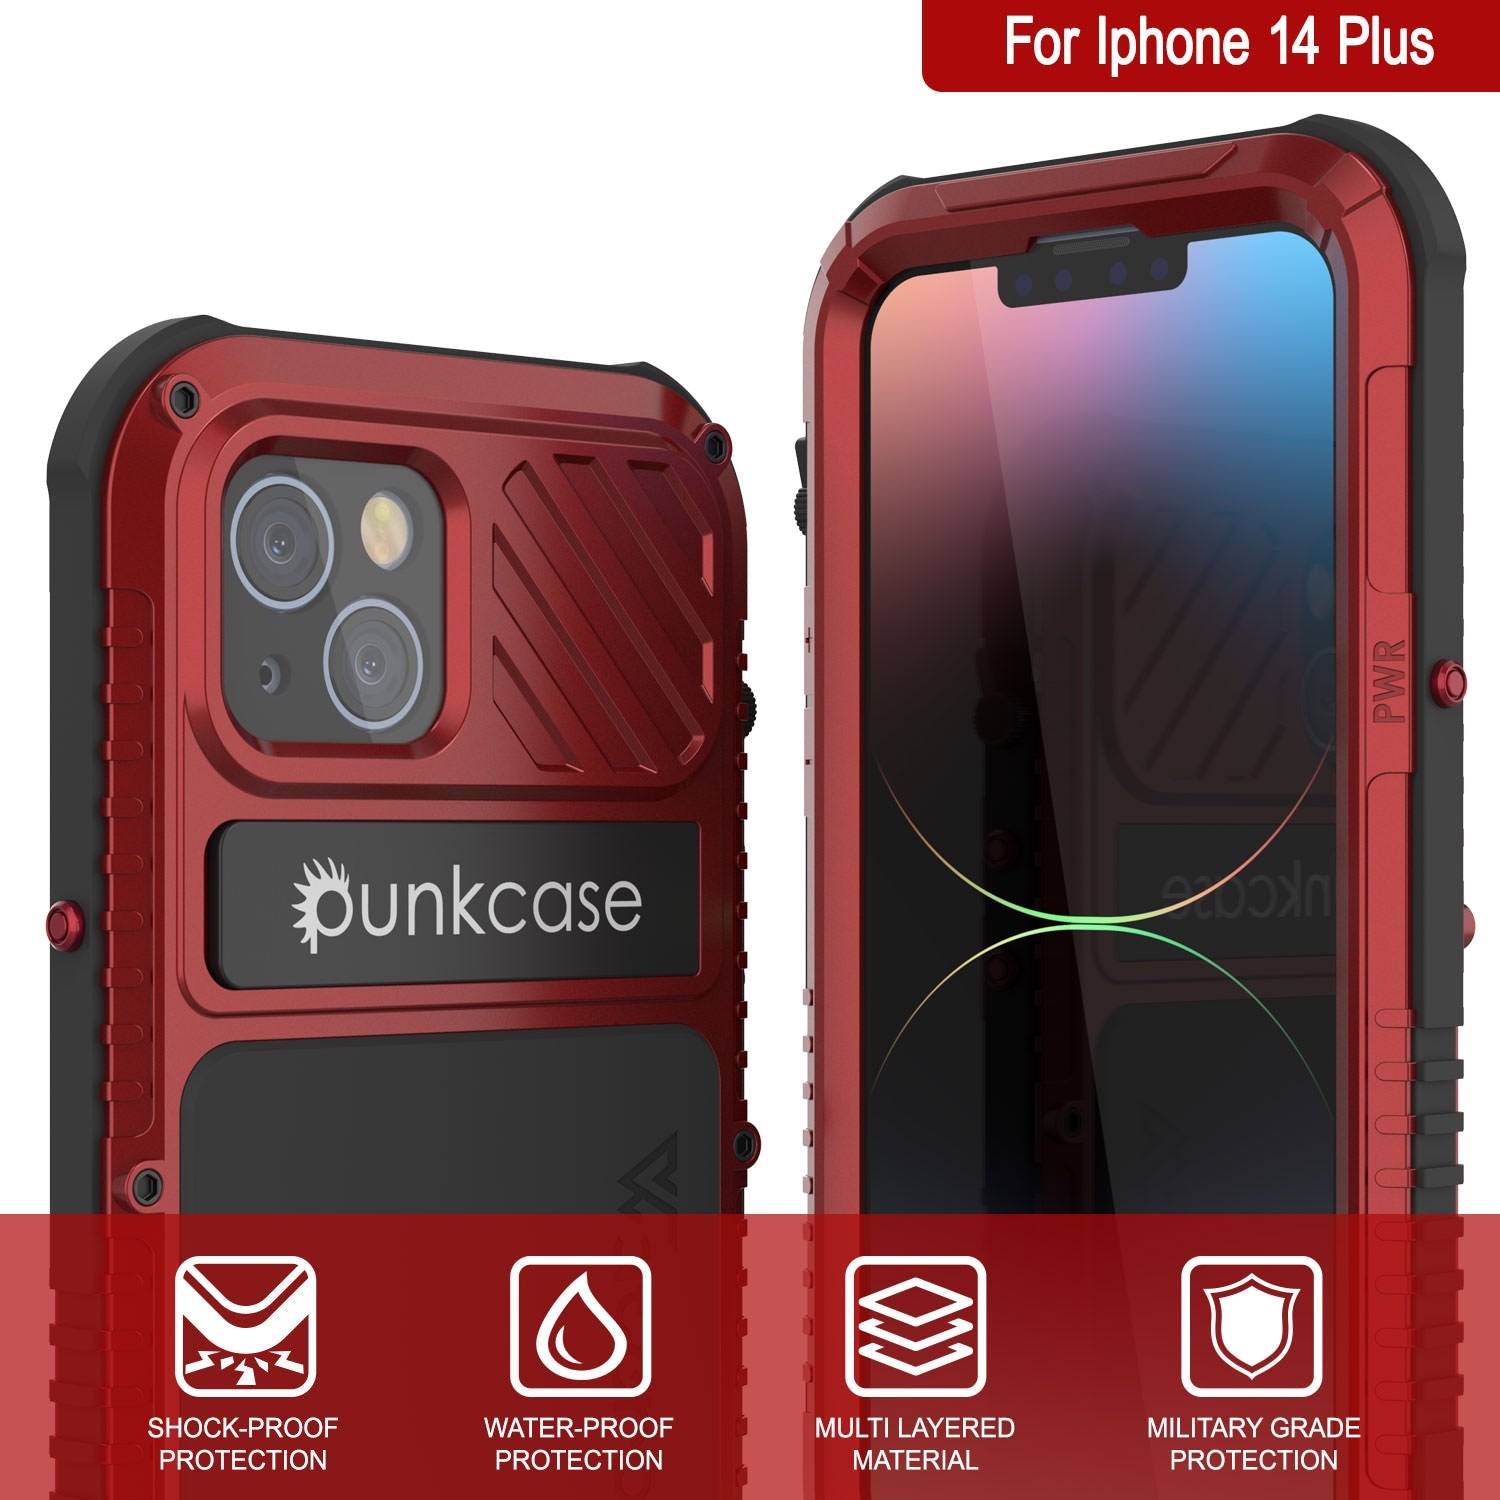 iPhone 14 Plus Metal Extreme 3.0 Case, Heavy Duty Military Grade Armor Cover [shock proof] Waterproof Aluminum Case [Red]